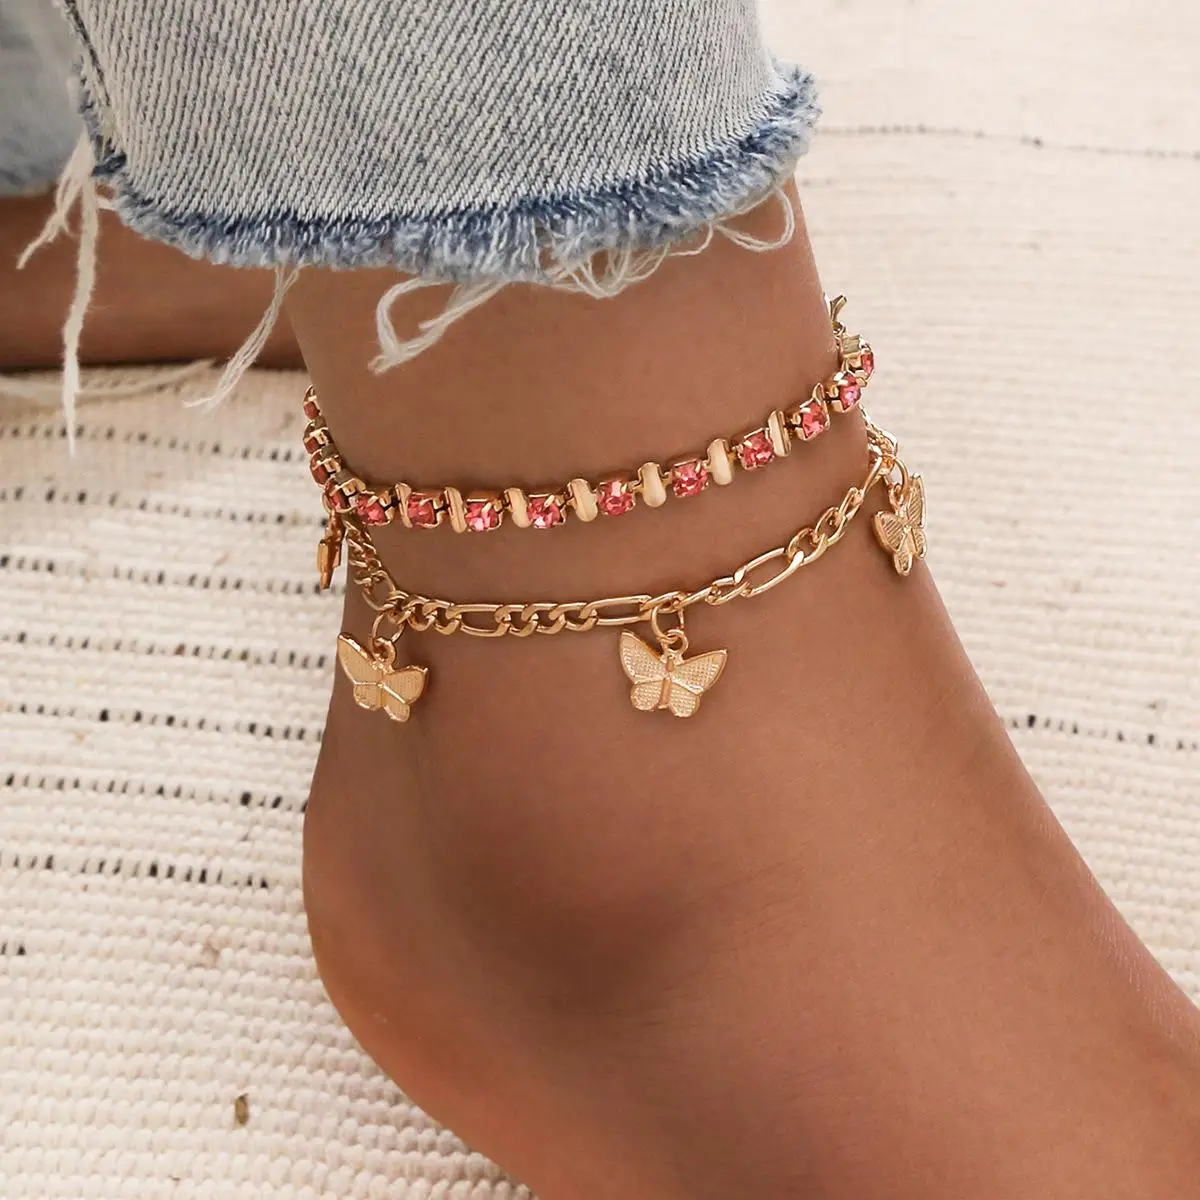 

Amazon Hot sale 18K Gold Plating Adjustable Butterfly Ankle Bracelet Summer Beach Charm Anklet For Women Girls Jewelry